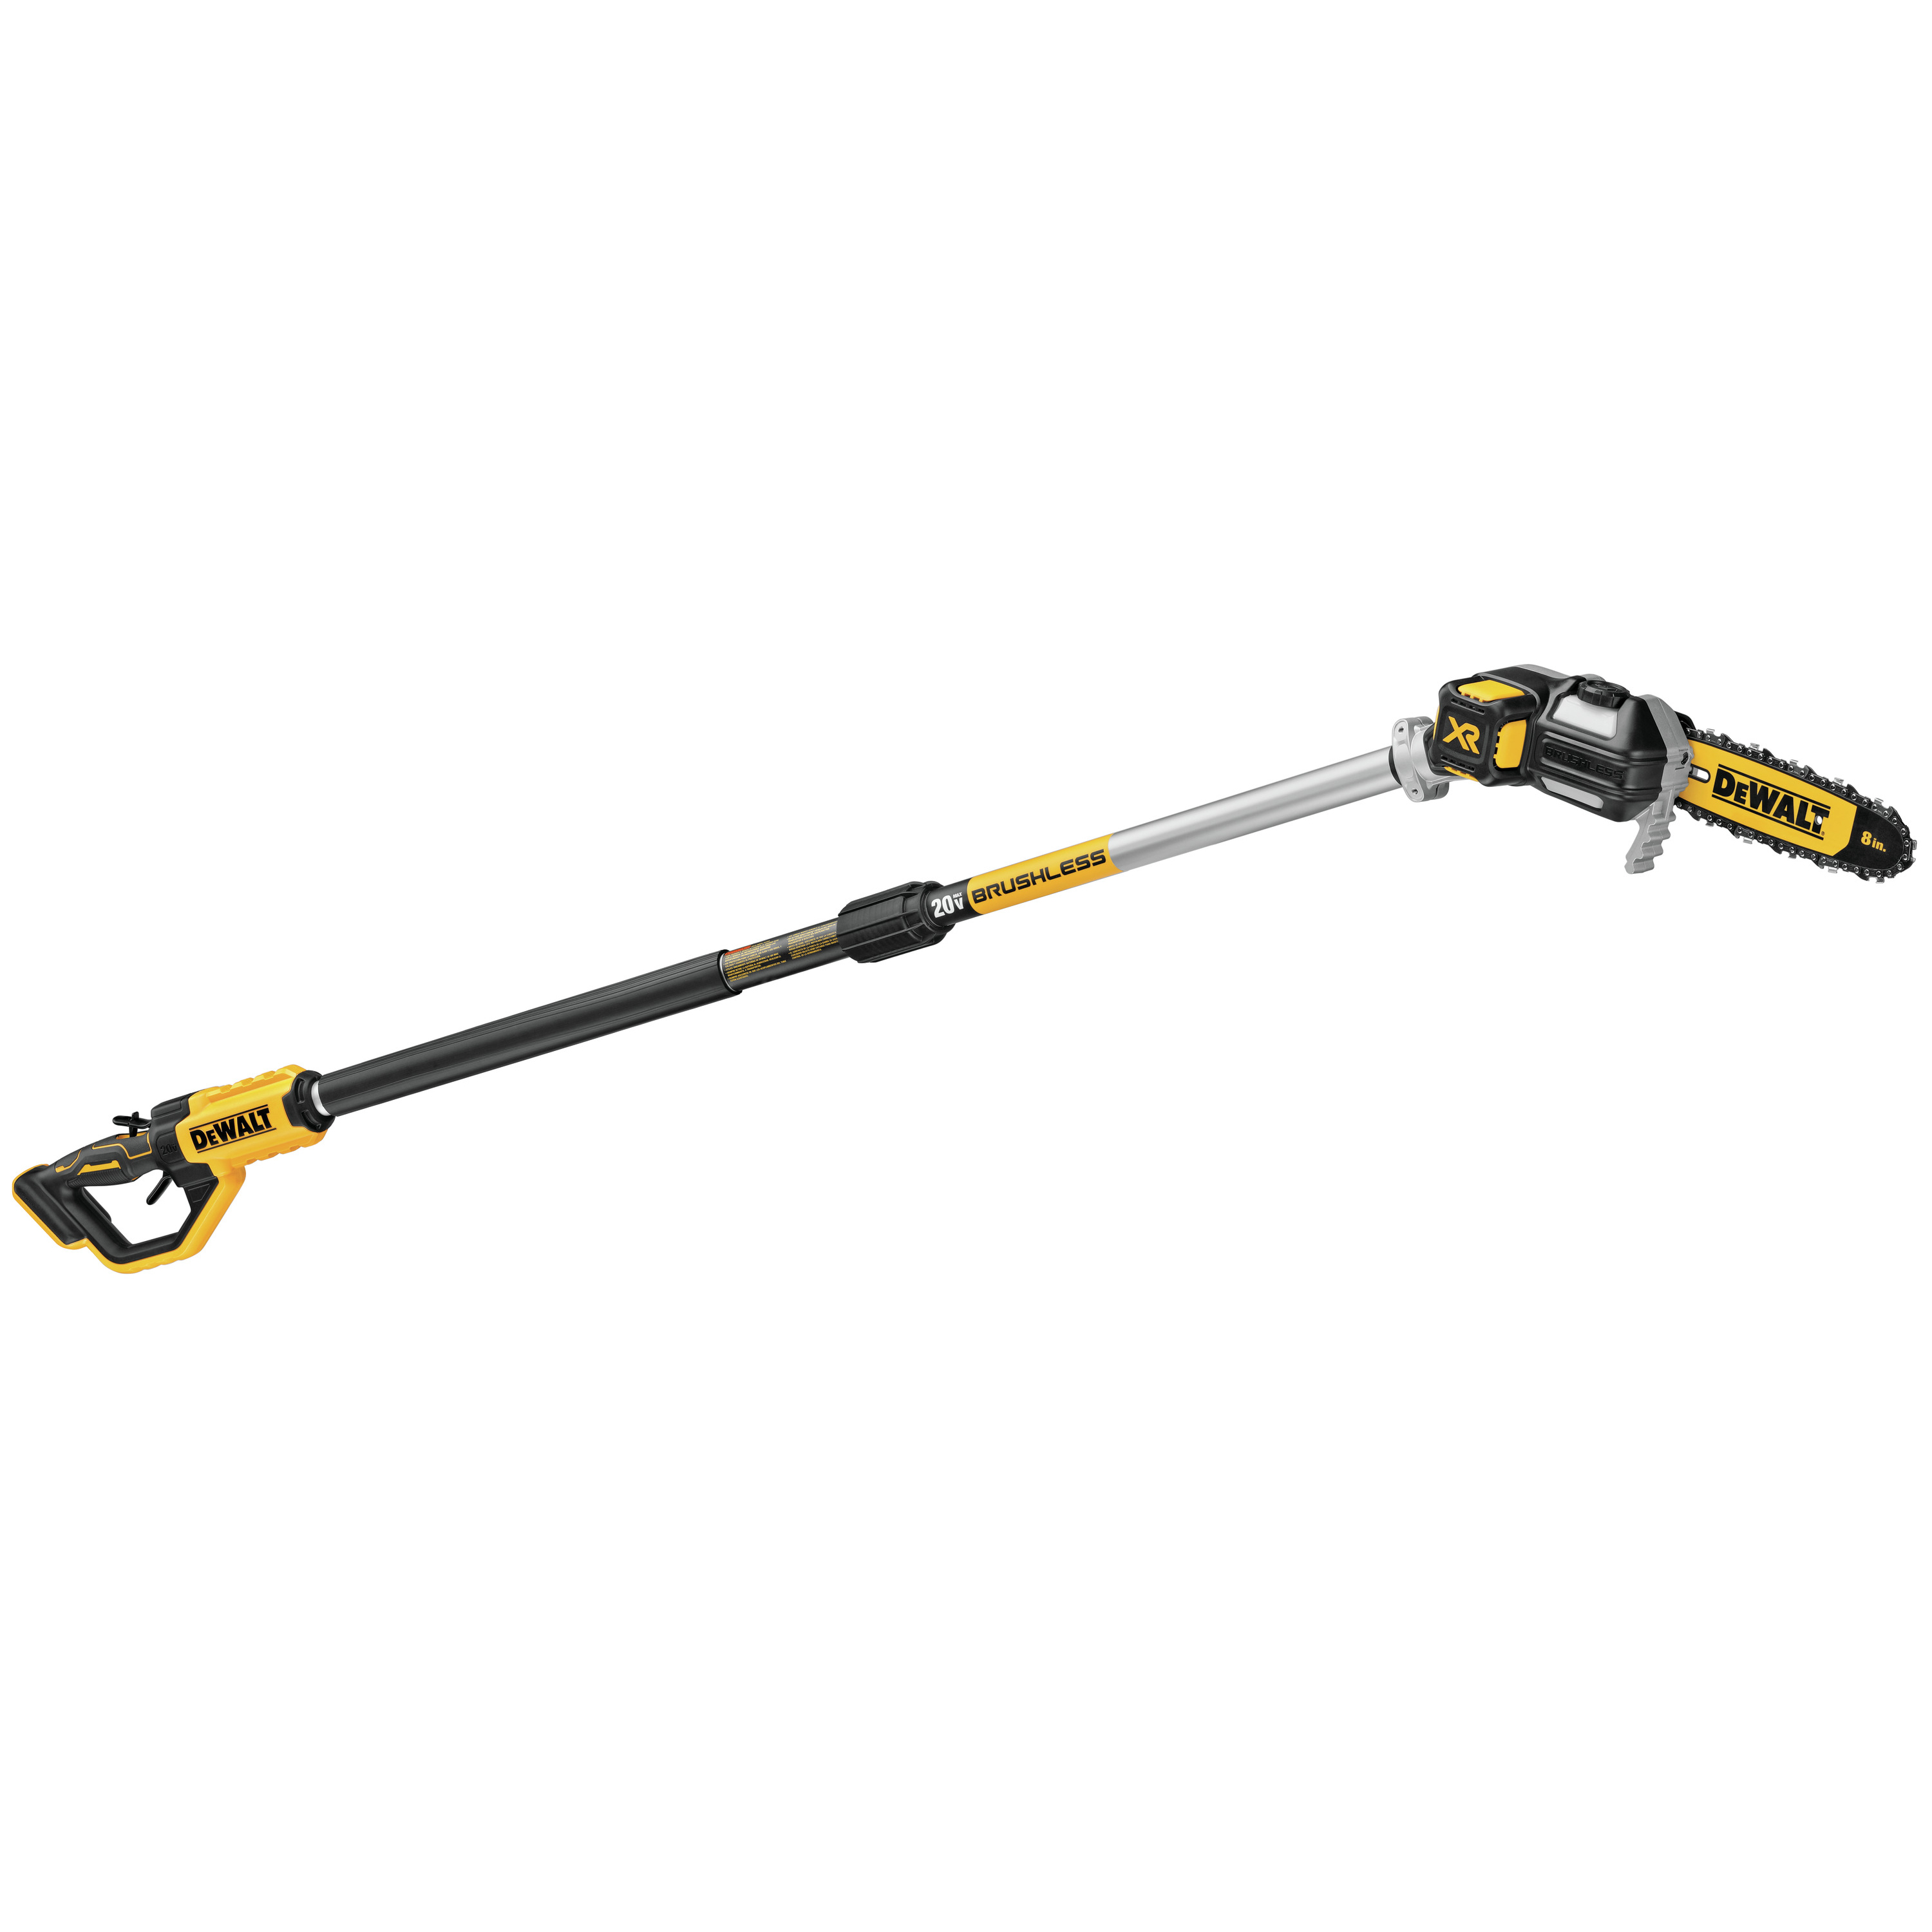 DCPS620B Pole Saw, 20 V, Plastic Pole, Comfort-Grip Handle, 8 in OAL